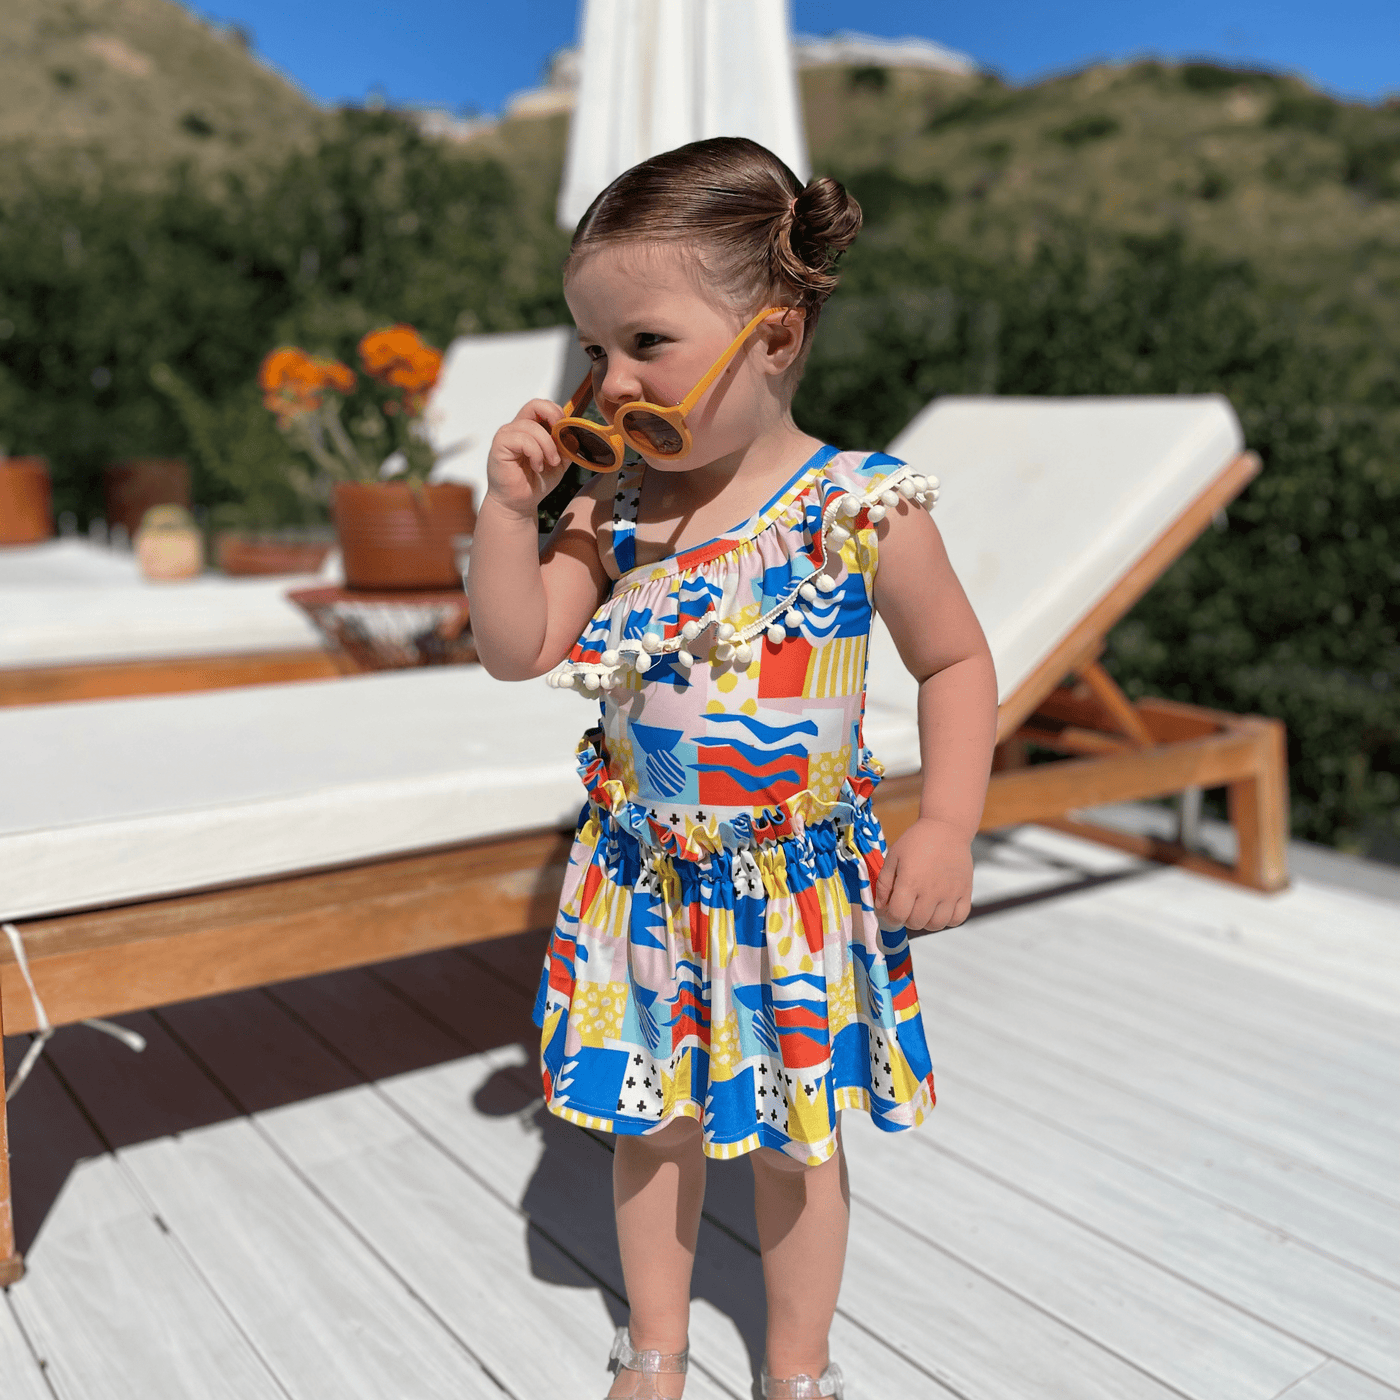 Best Day Ever Kids Swimsuit Coverup Mykonos Skover-Up buy online boutique kids clothing